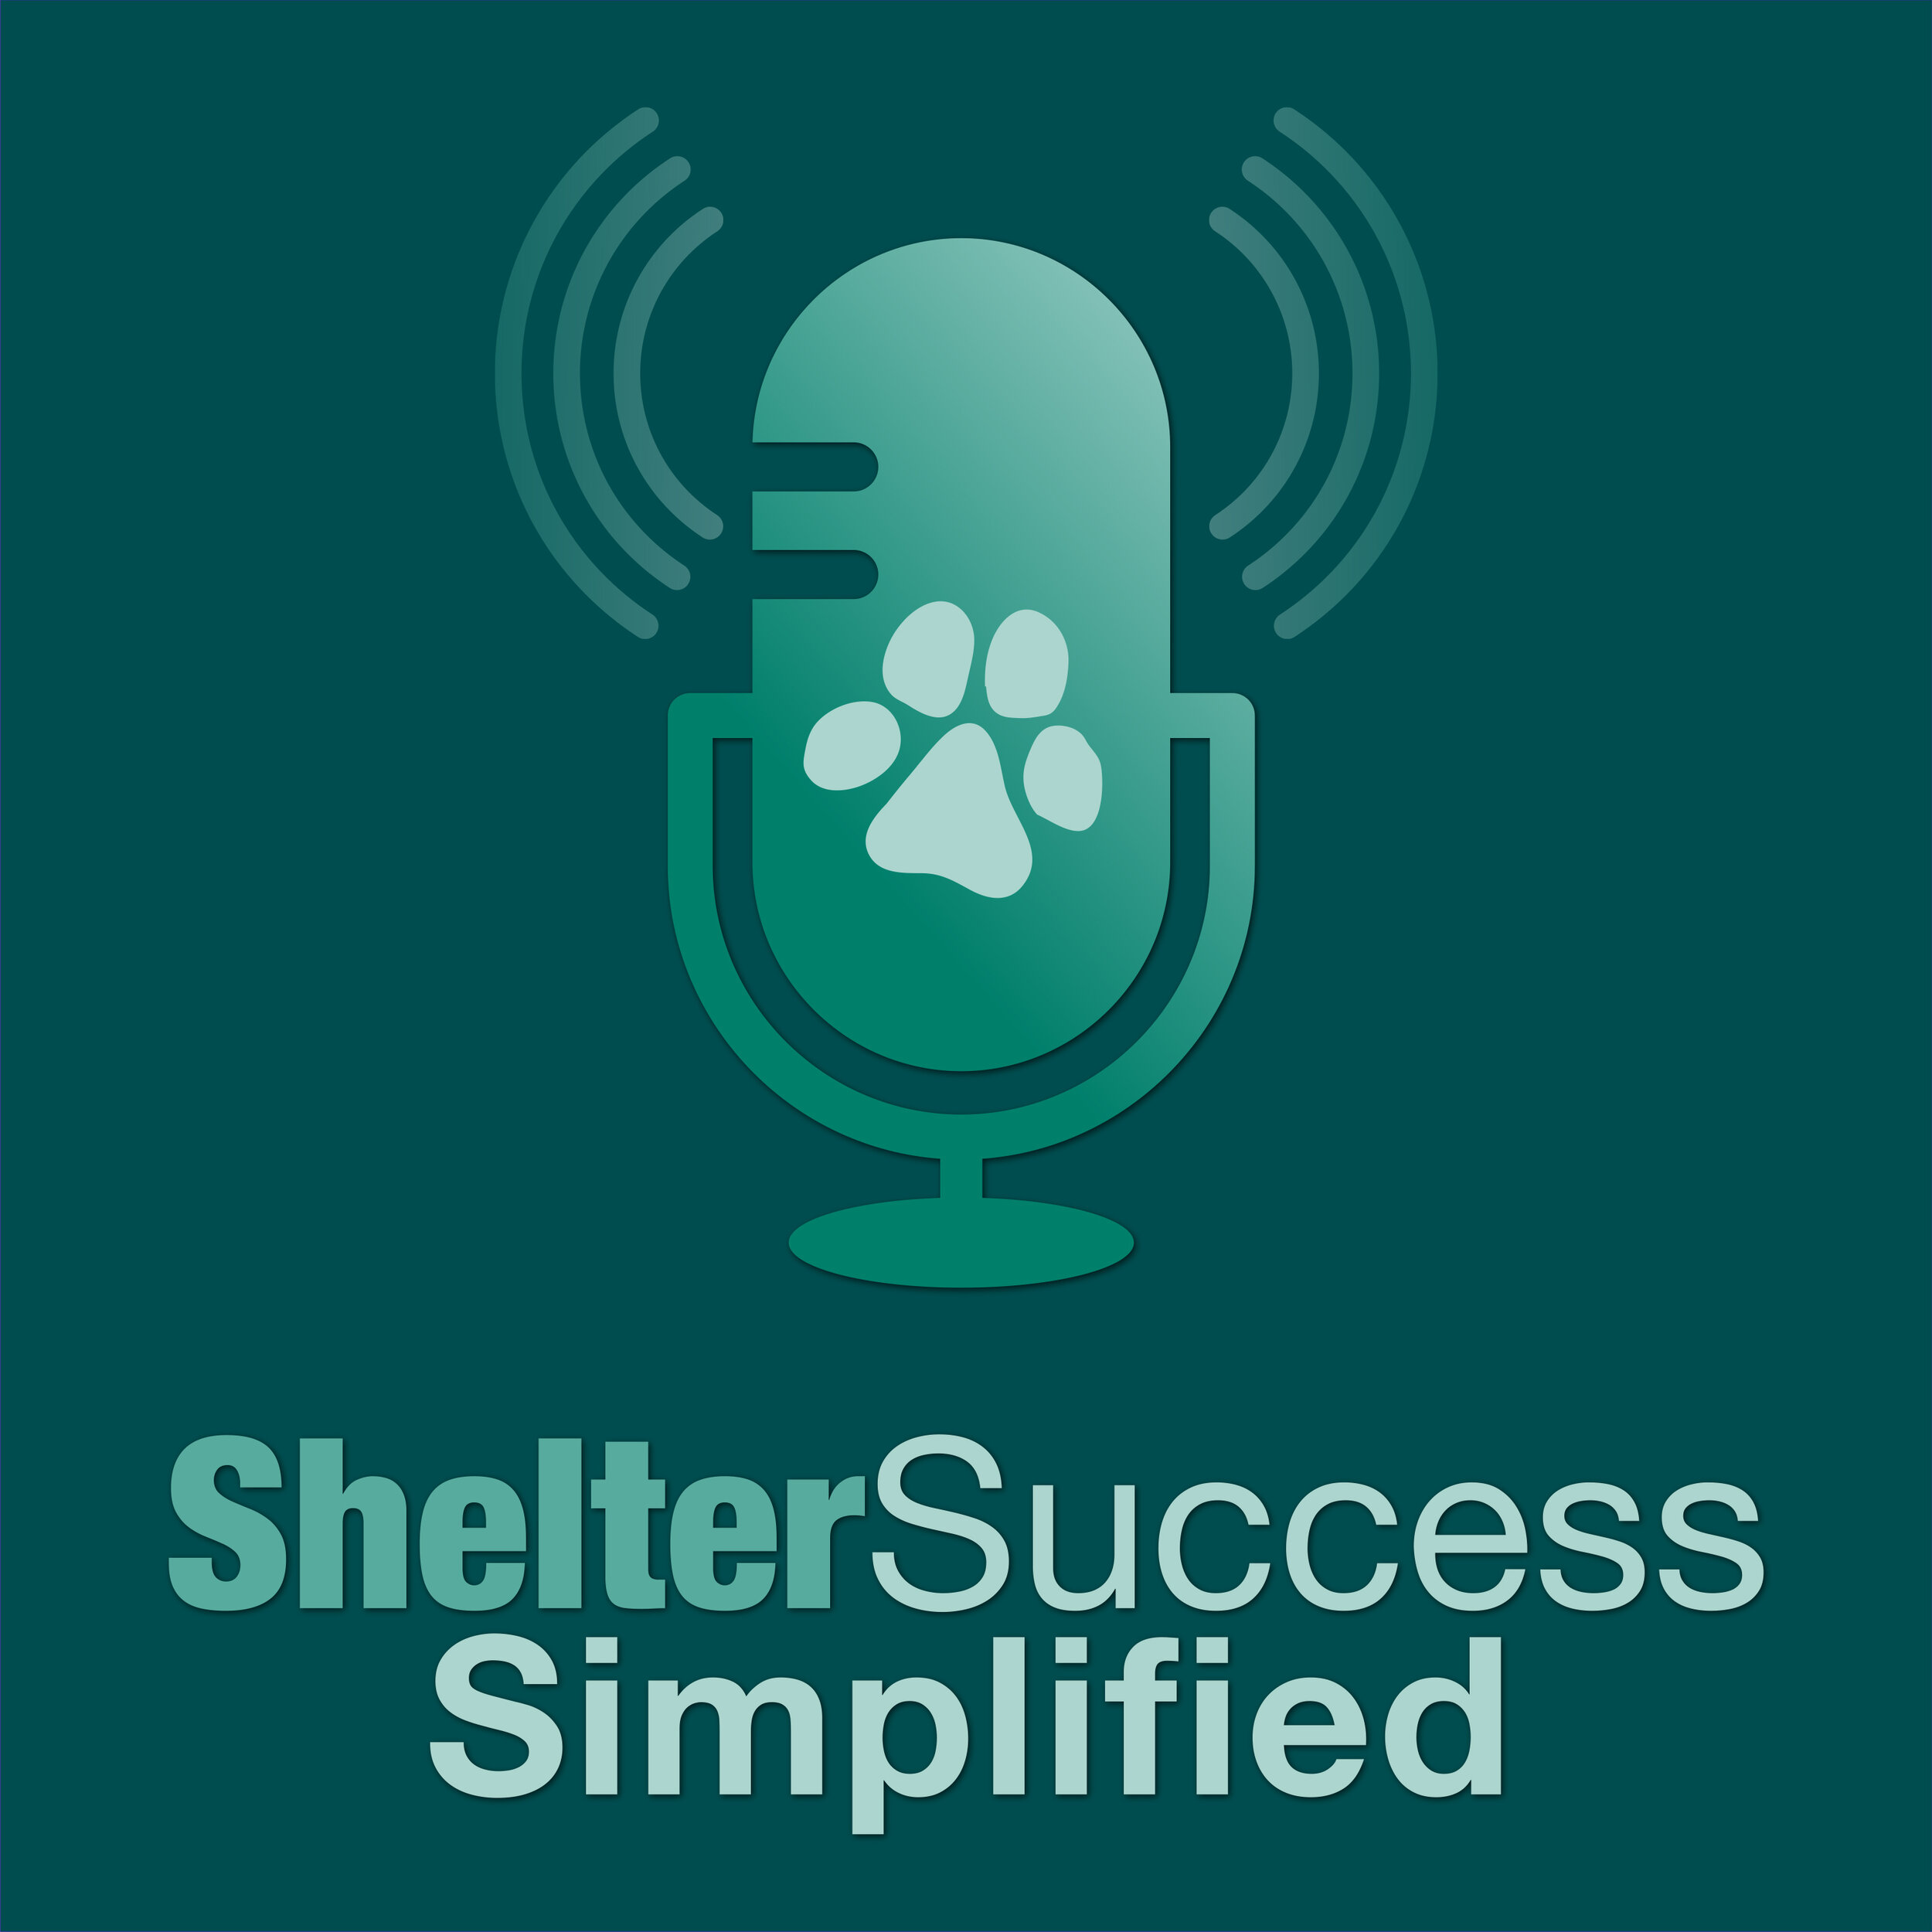 Shelter_Success_Simplified_Square 2.jpg